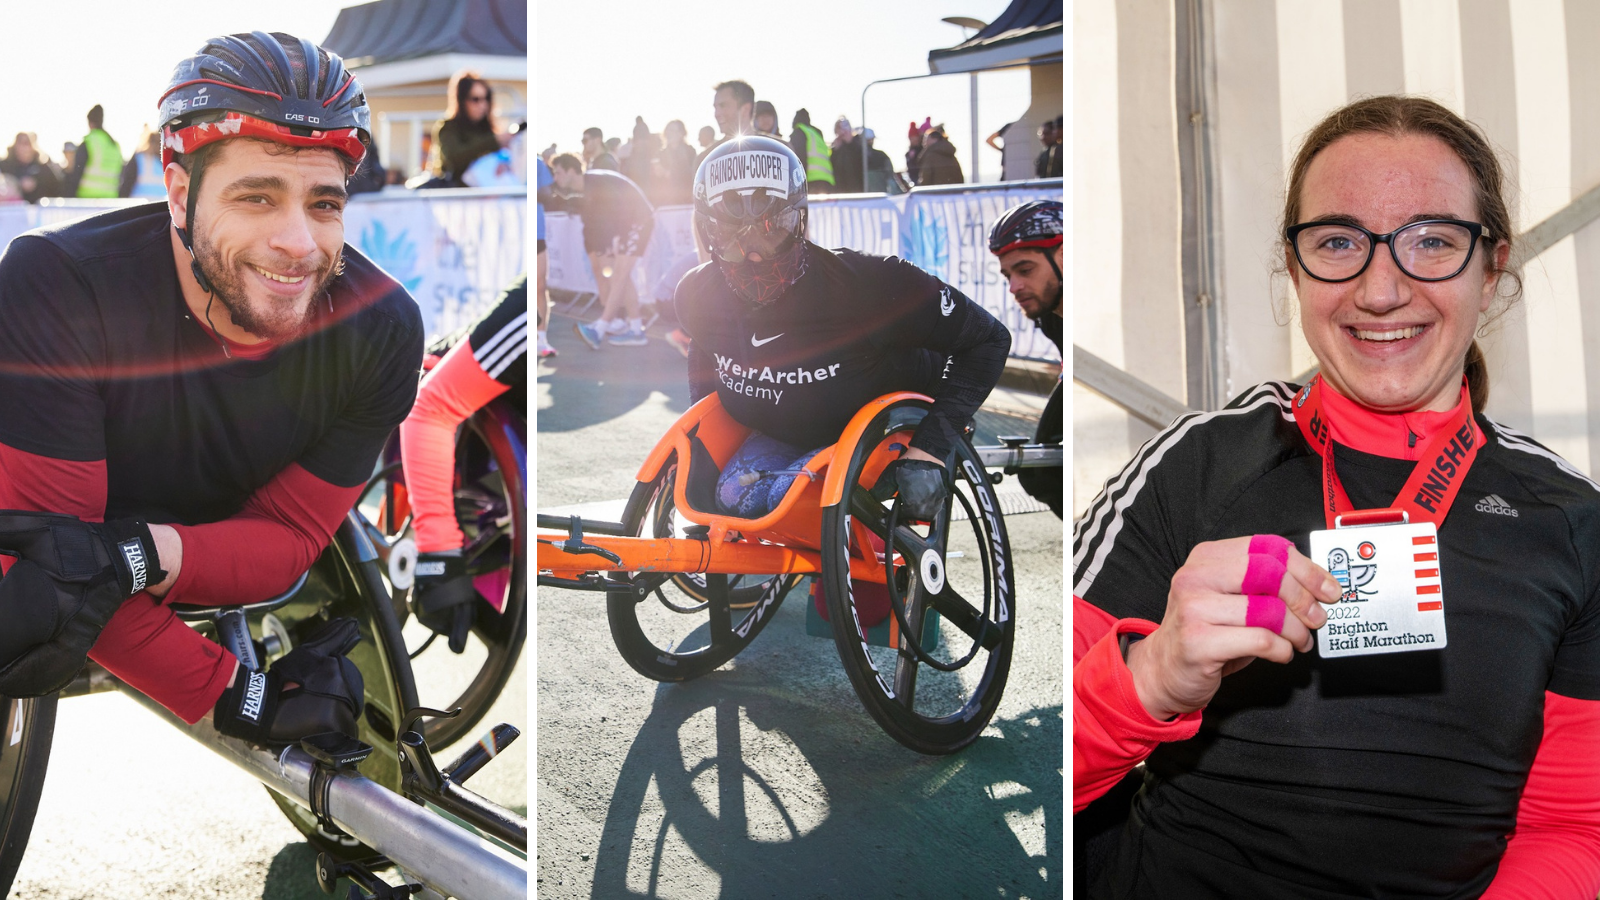 Congratulations to Get Kids Going!’s wheelchair racers  for their results in Brighton Half Marathon